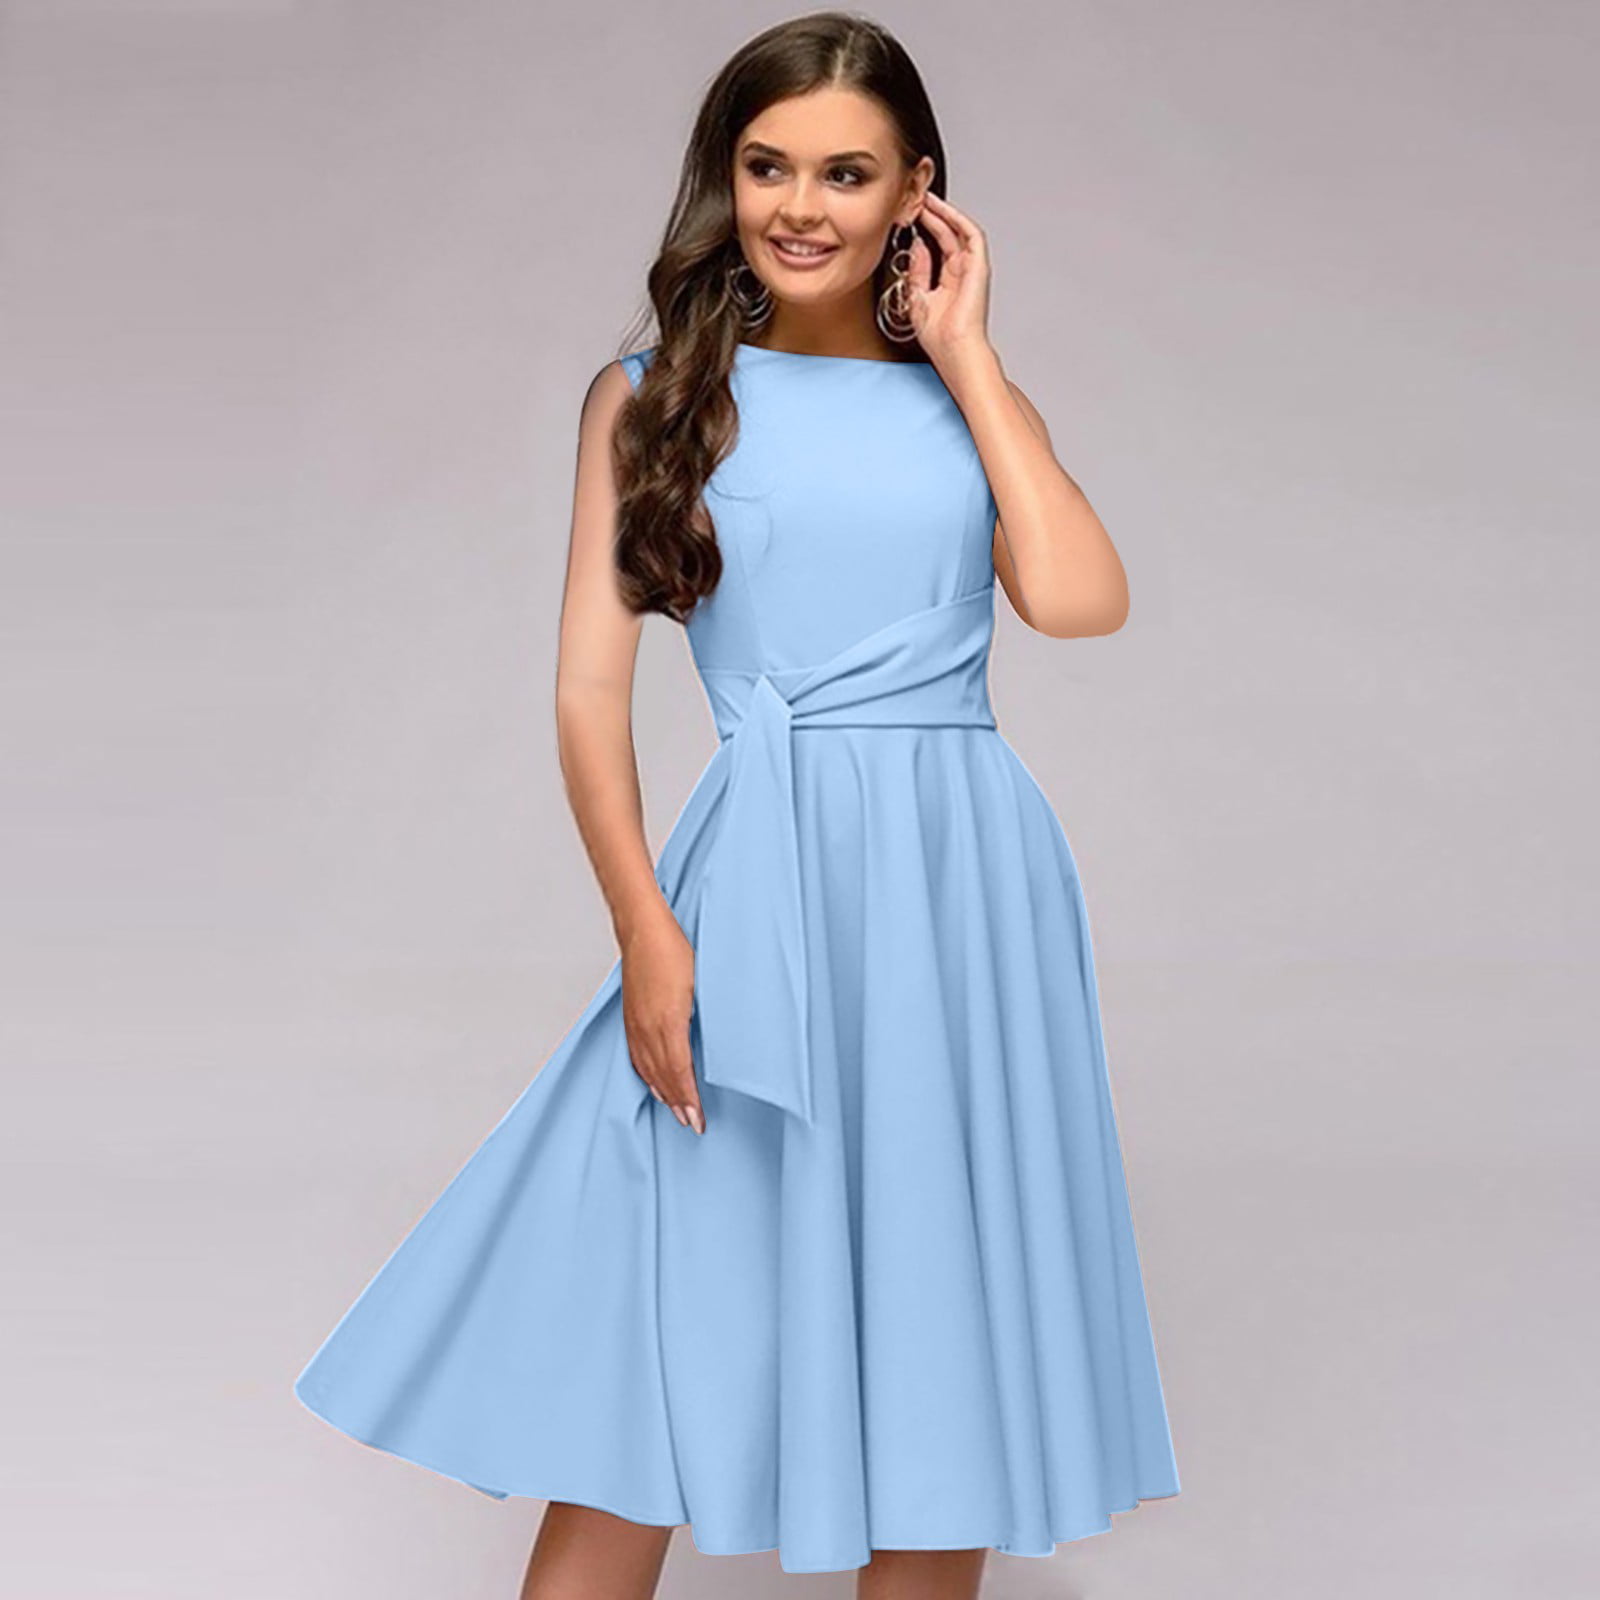 Yilirongyumm〗 Blue M Casual Dresses For Women Polyestersolid Color Party Women - Walmart.com